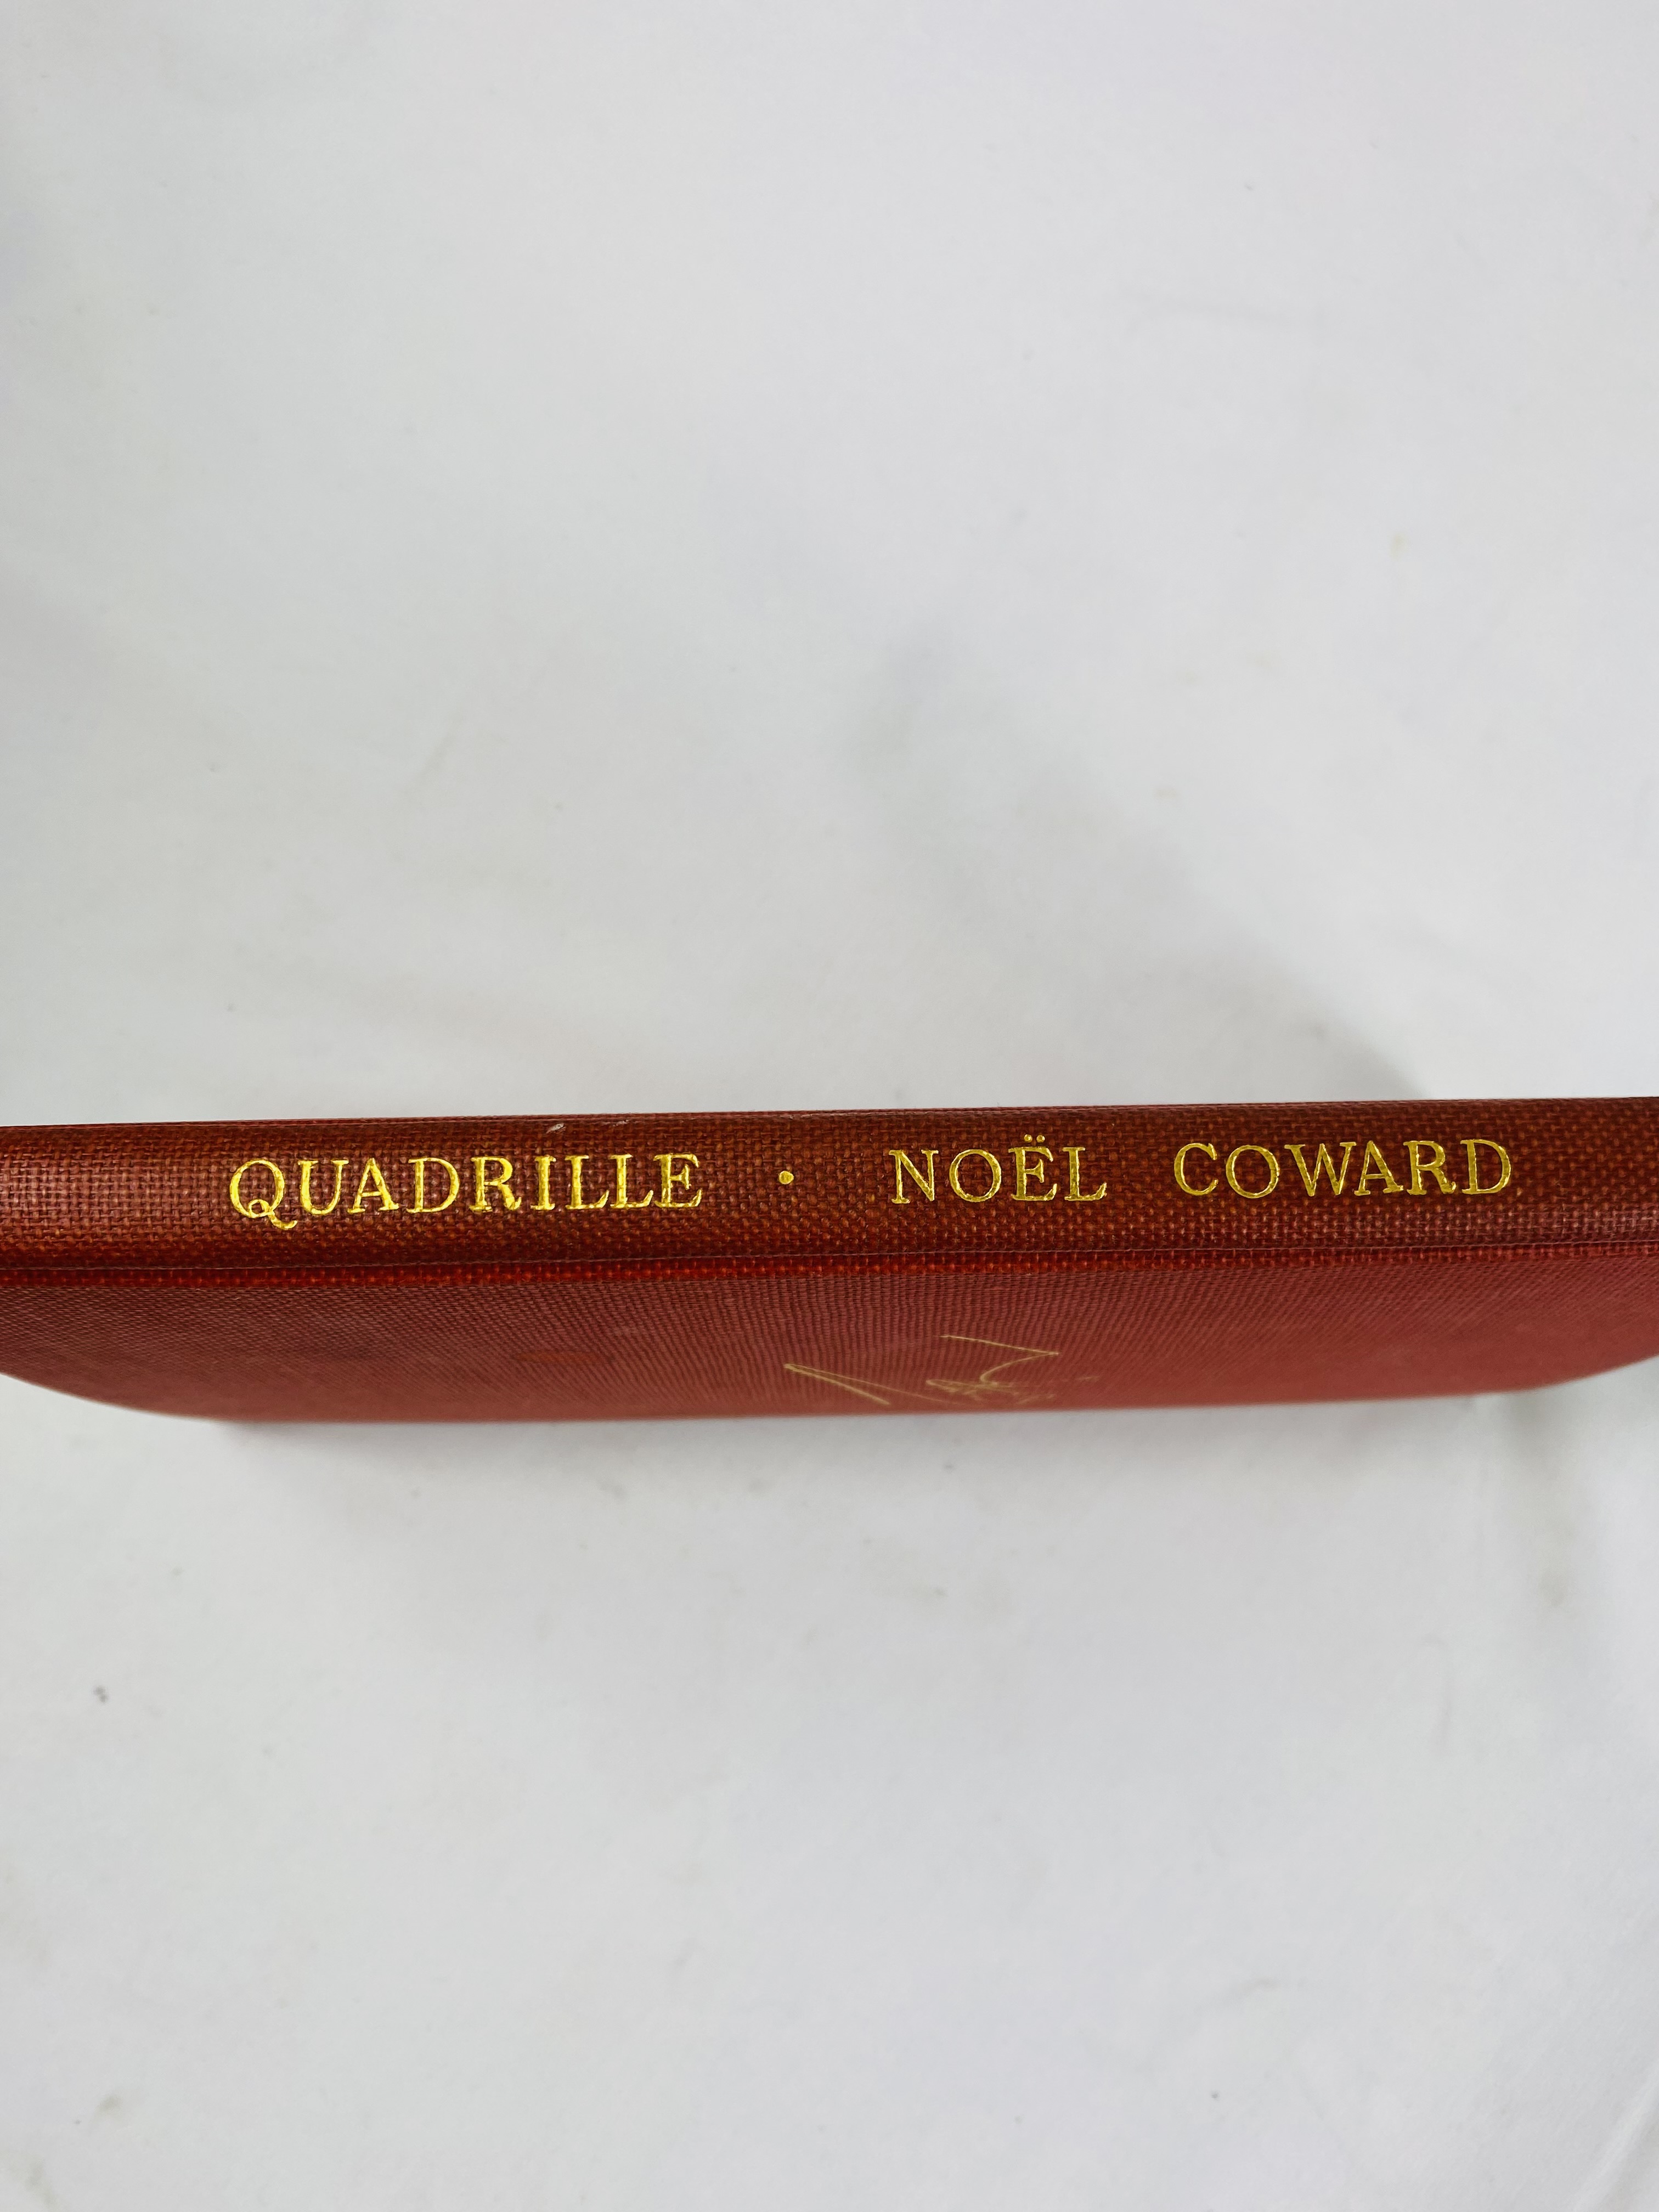 Noel Coward, Quadrille, together with two copies of The Art of Noel Coward by Robert Greacen - Image 5 of 6